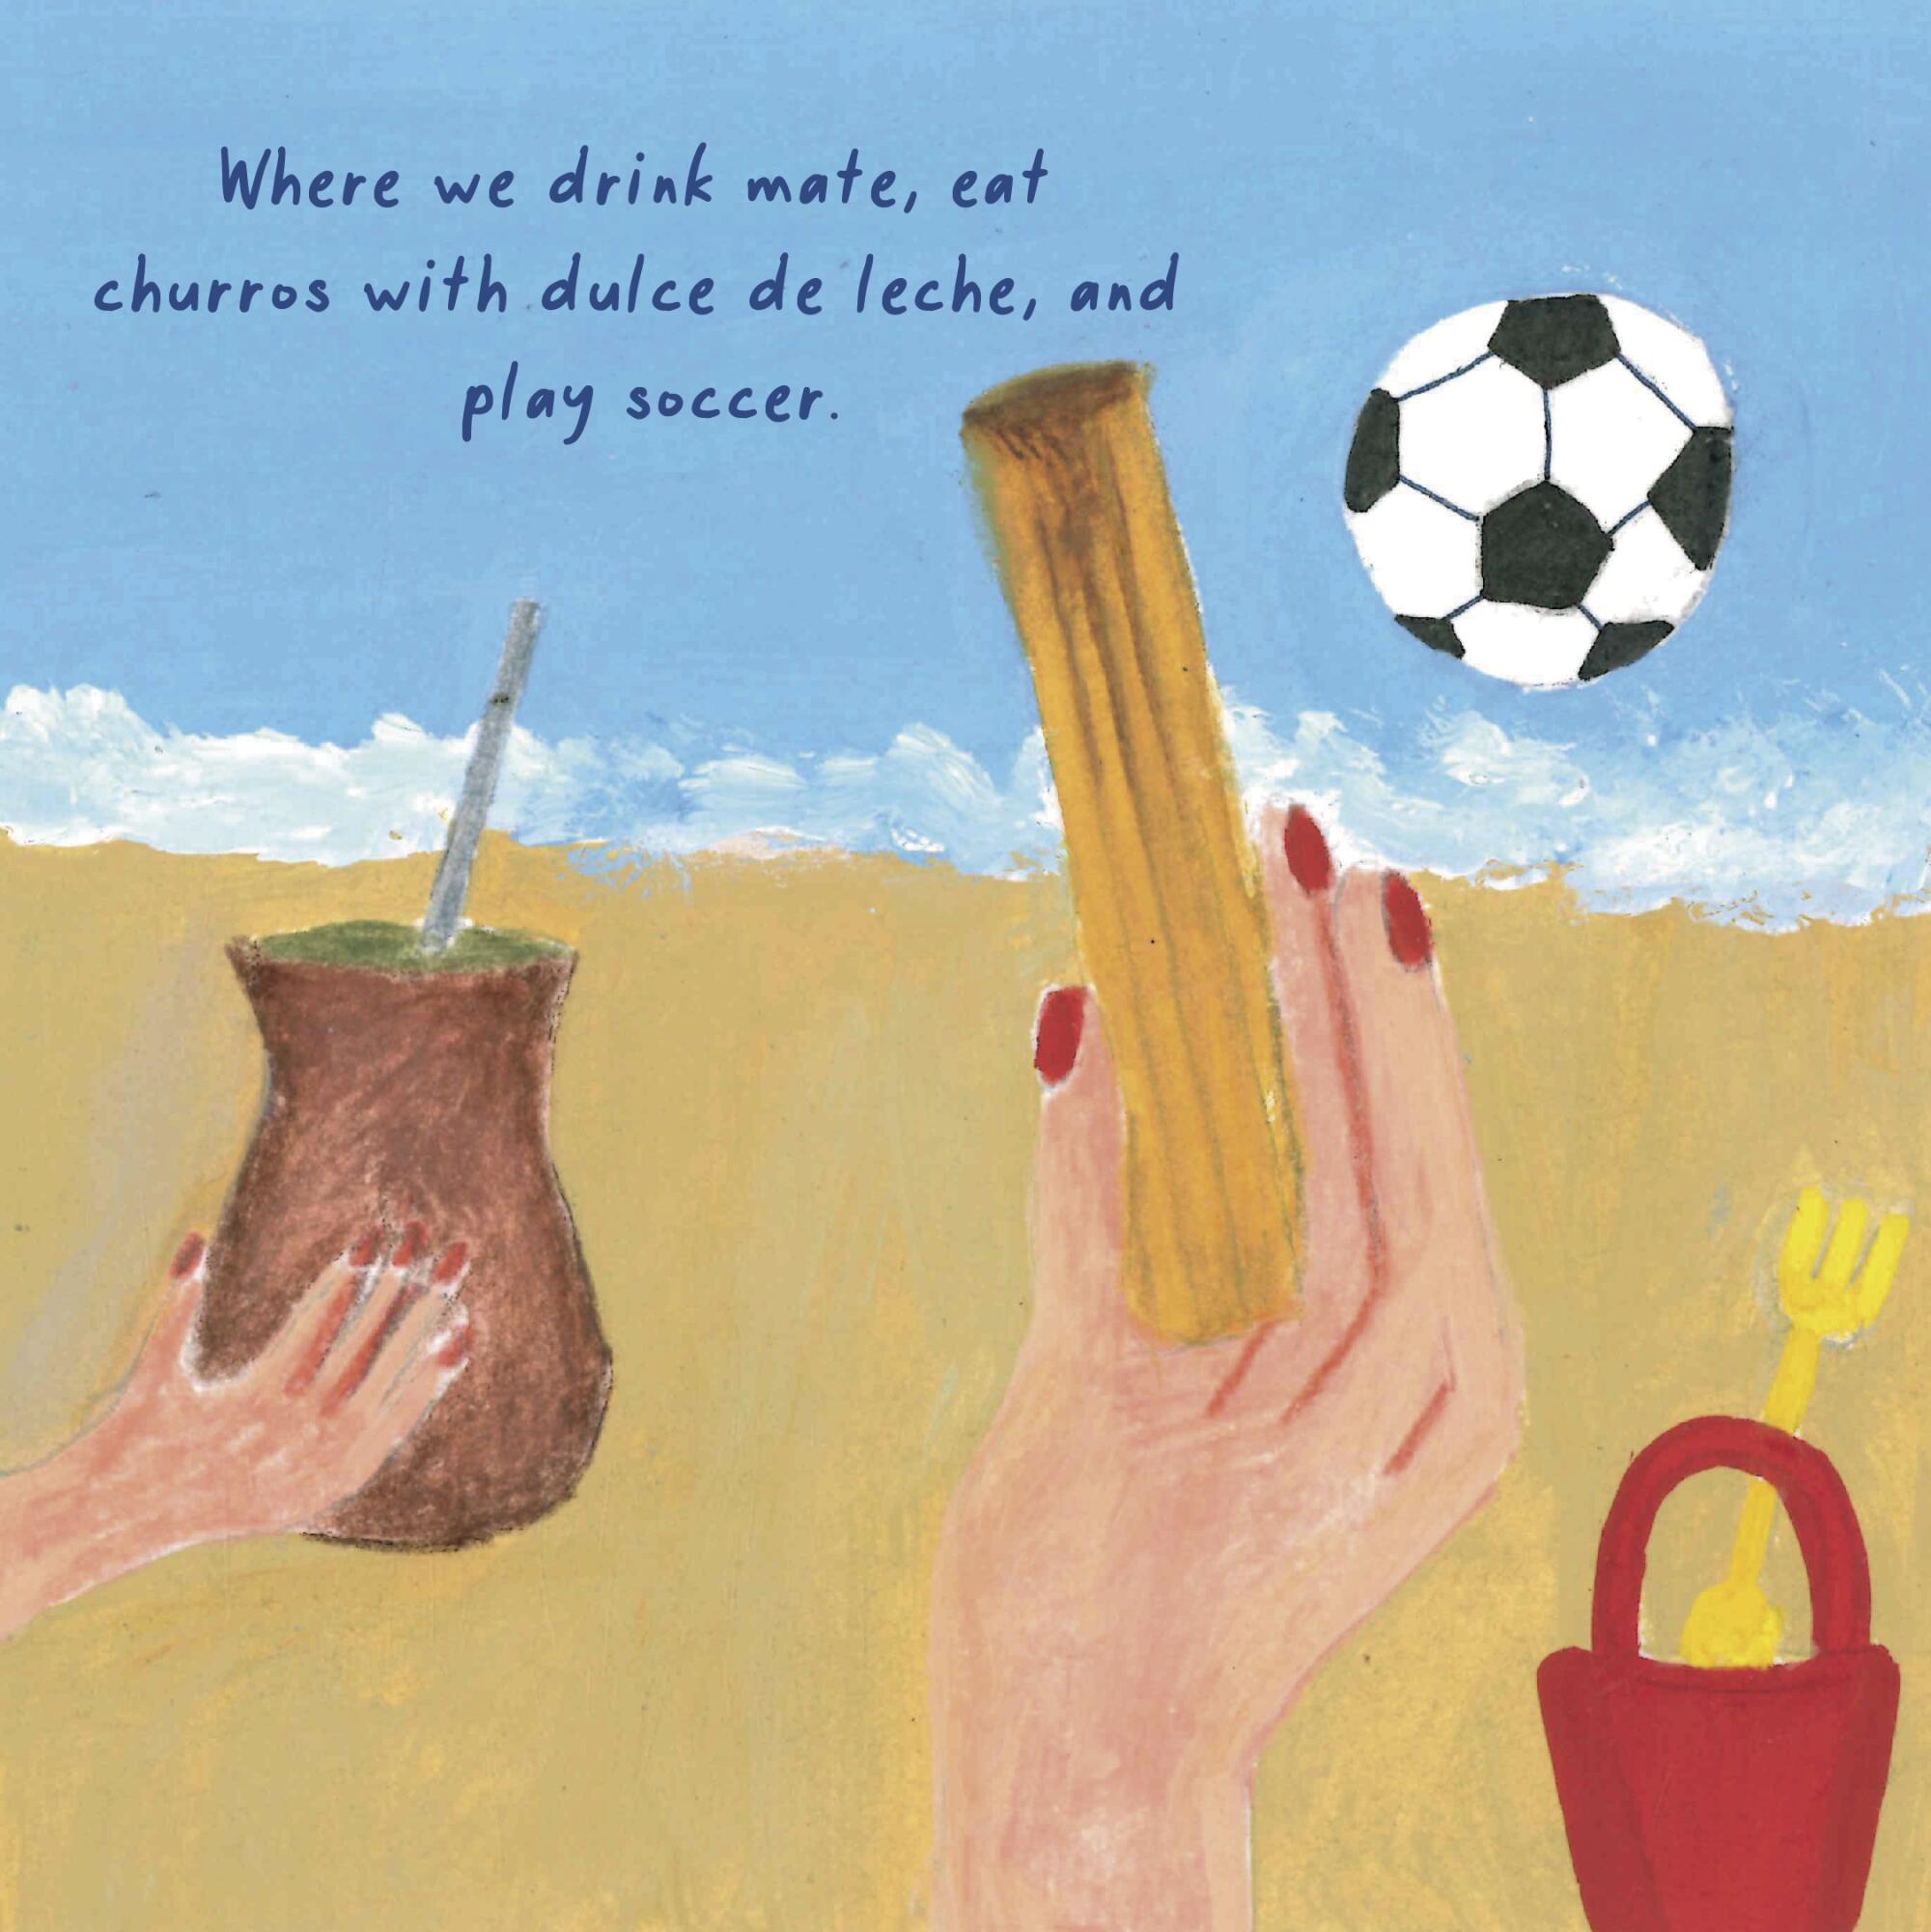 Where we drink make, eat churros with dulce de leche, and play soccer. 